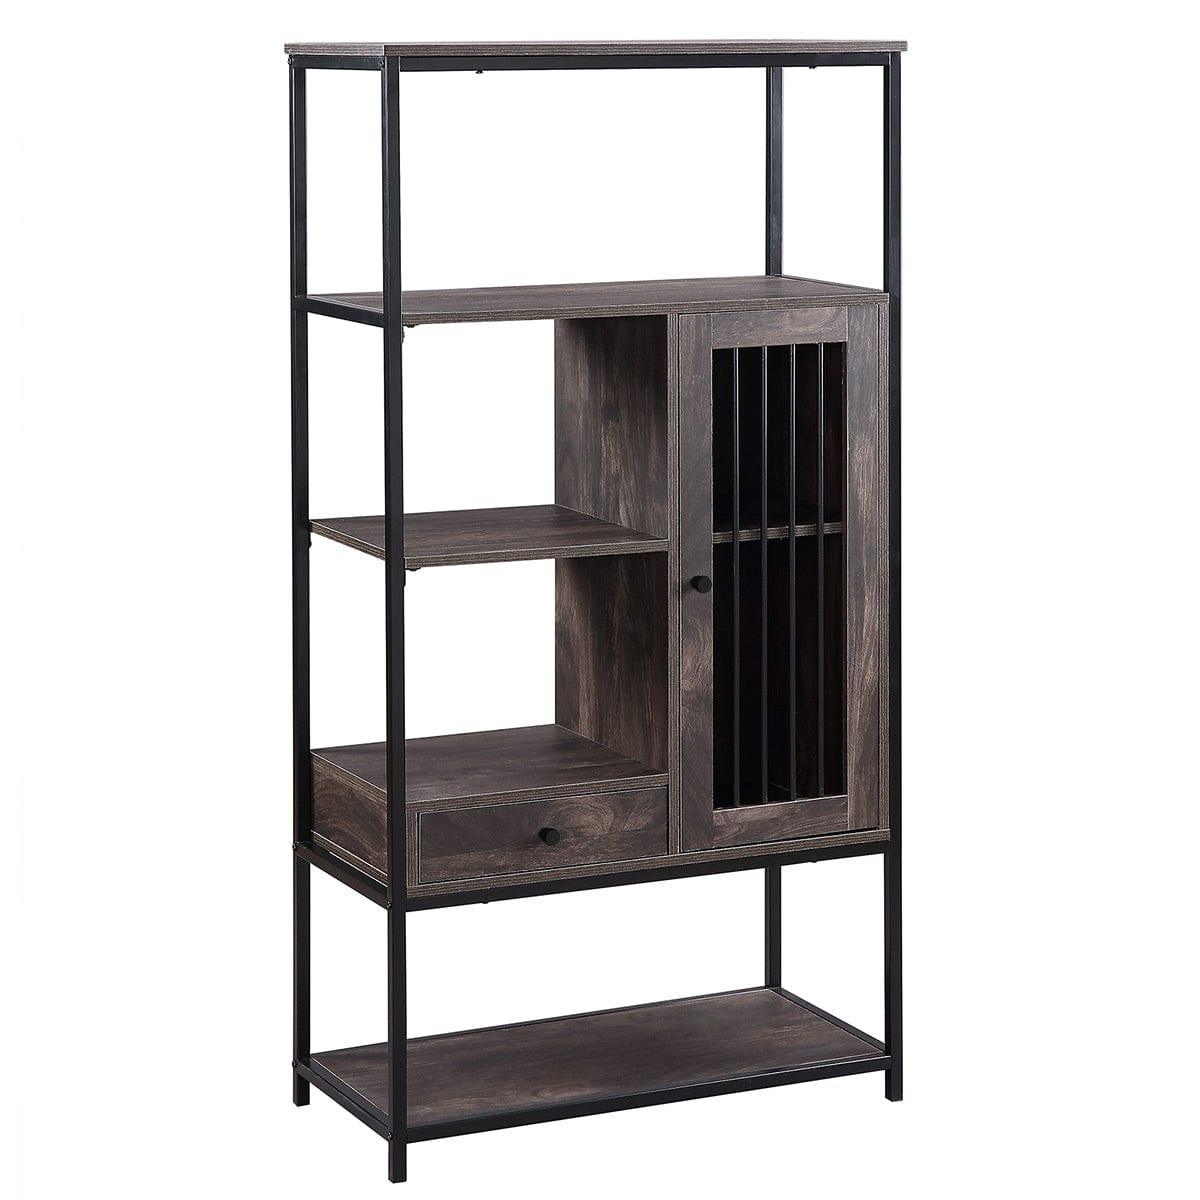 Shop Home Office Bookcase and Bookshelf 5 Tier Display Shelf with Doors and Drawers, Freestanding Multi-functional Decorative Storage Shelving, Vintage Brown Industrial Style (Brown) Mademoiselle Home Decor